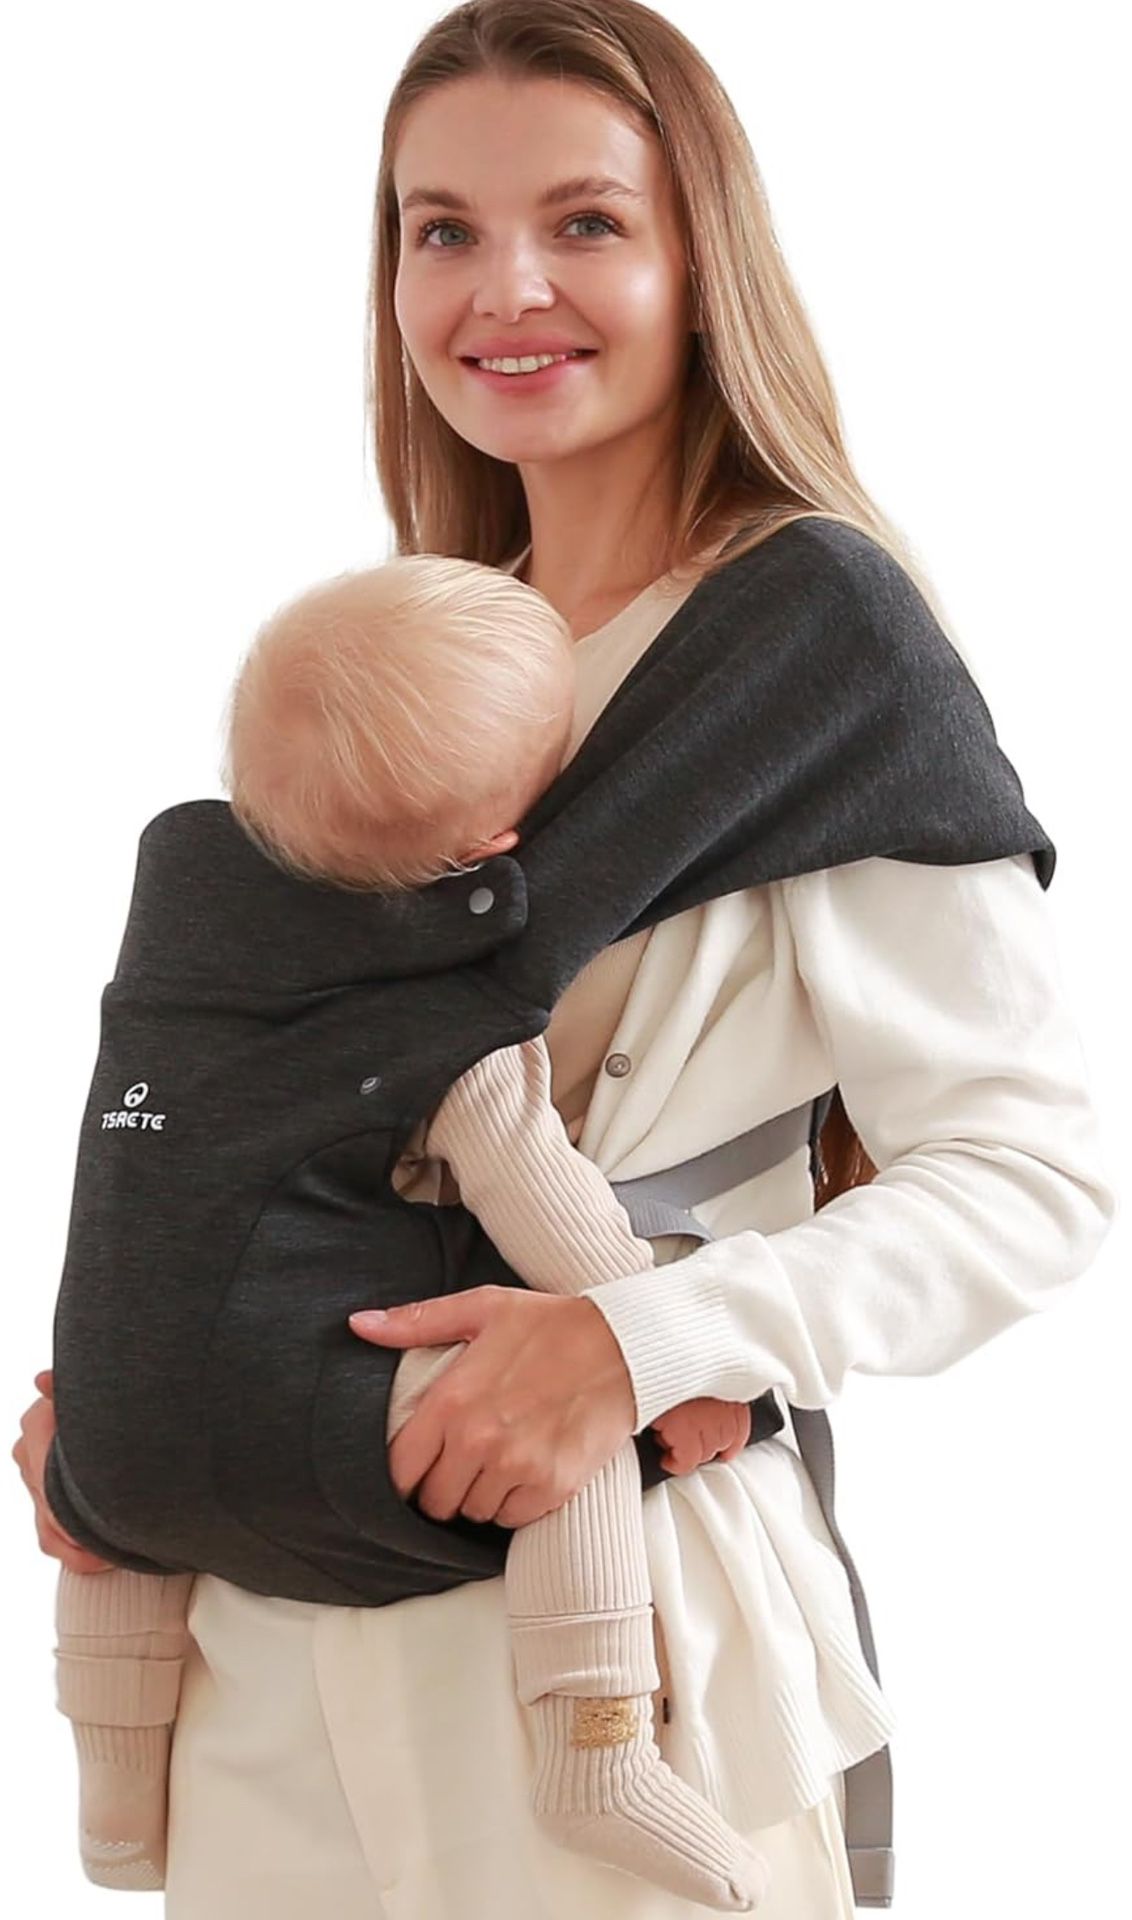 Baby Carrier Newborn to Toddler - Baby Ergonomic and Cozy Infant Carrier with Lumbar Support for 7-25lbs,Easy Adjustable Baby Chest Carrier, Fa